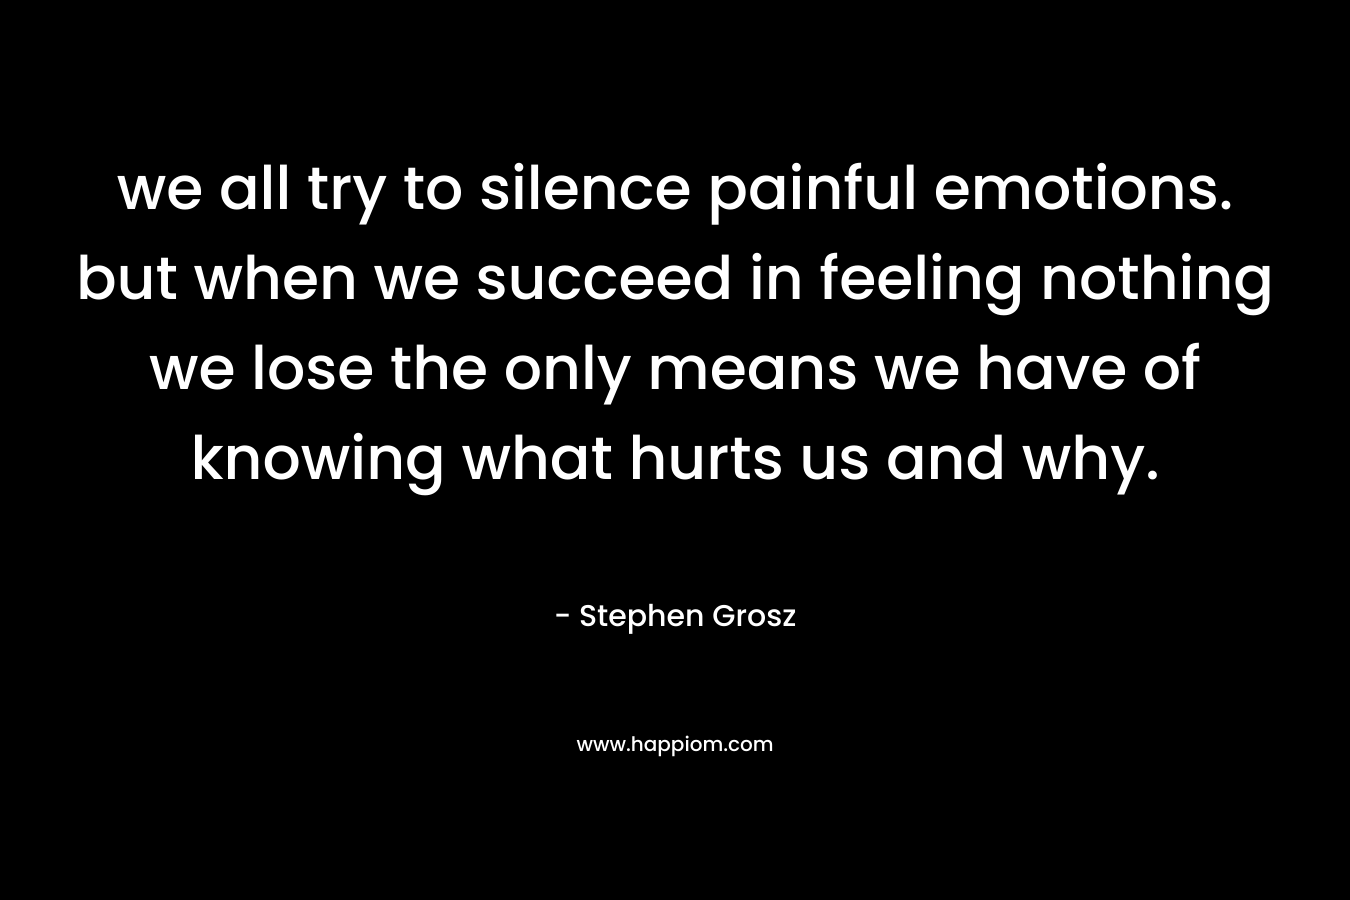 we all try to silence painful emotions. but when we succeed in feeling nothing we lose the only means we have of knowing what hurts us and why. – Stephen Grosz